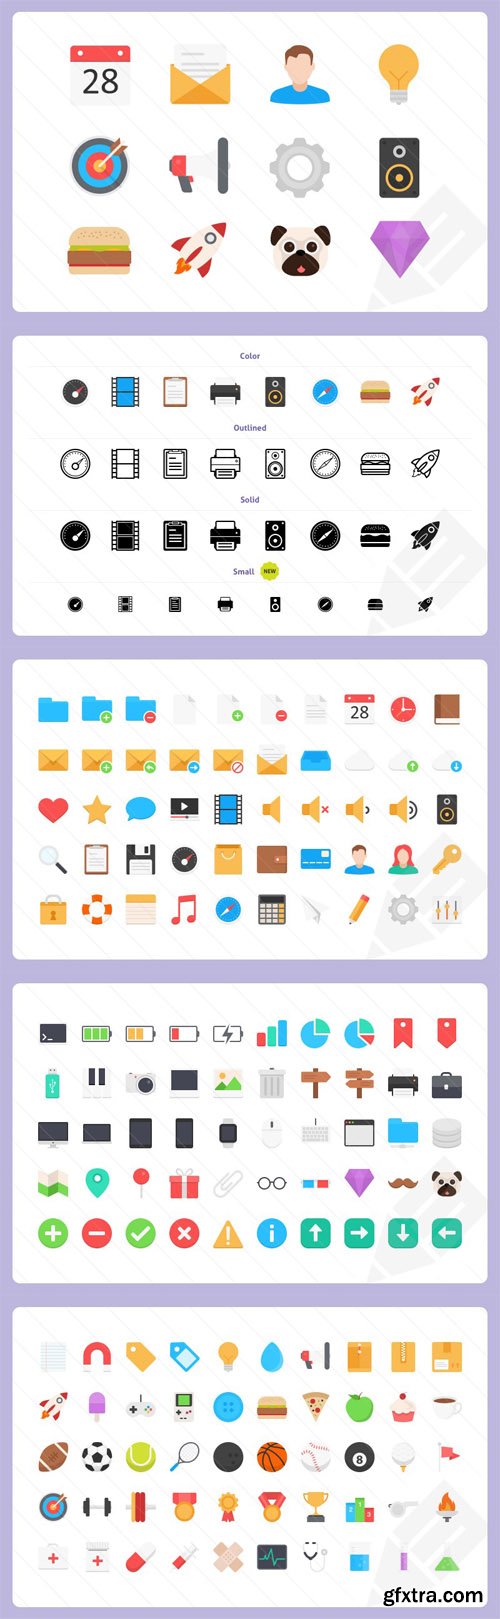 Filo - Flat Vector Icons Pack